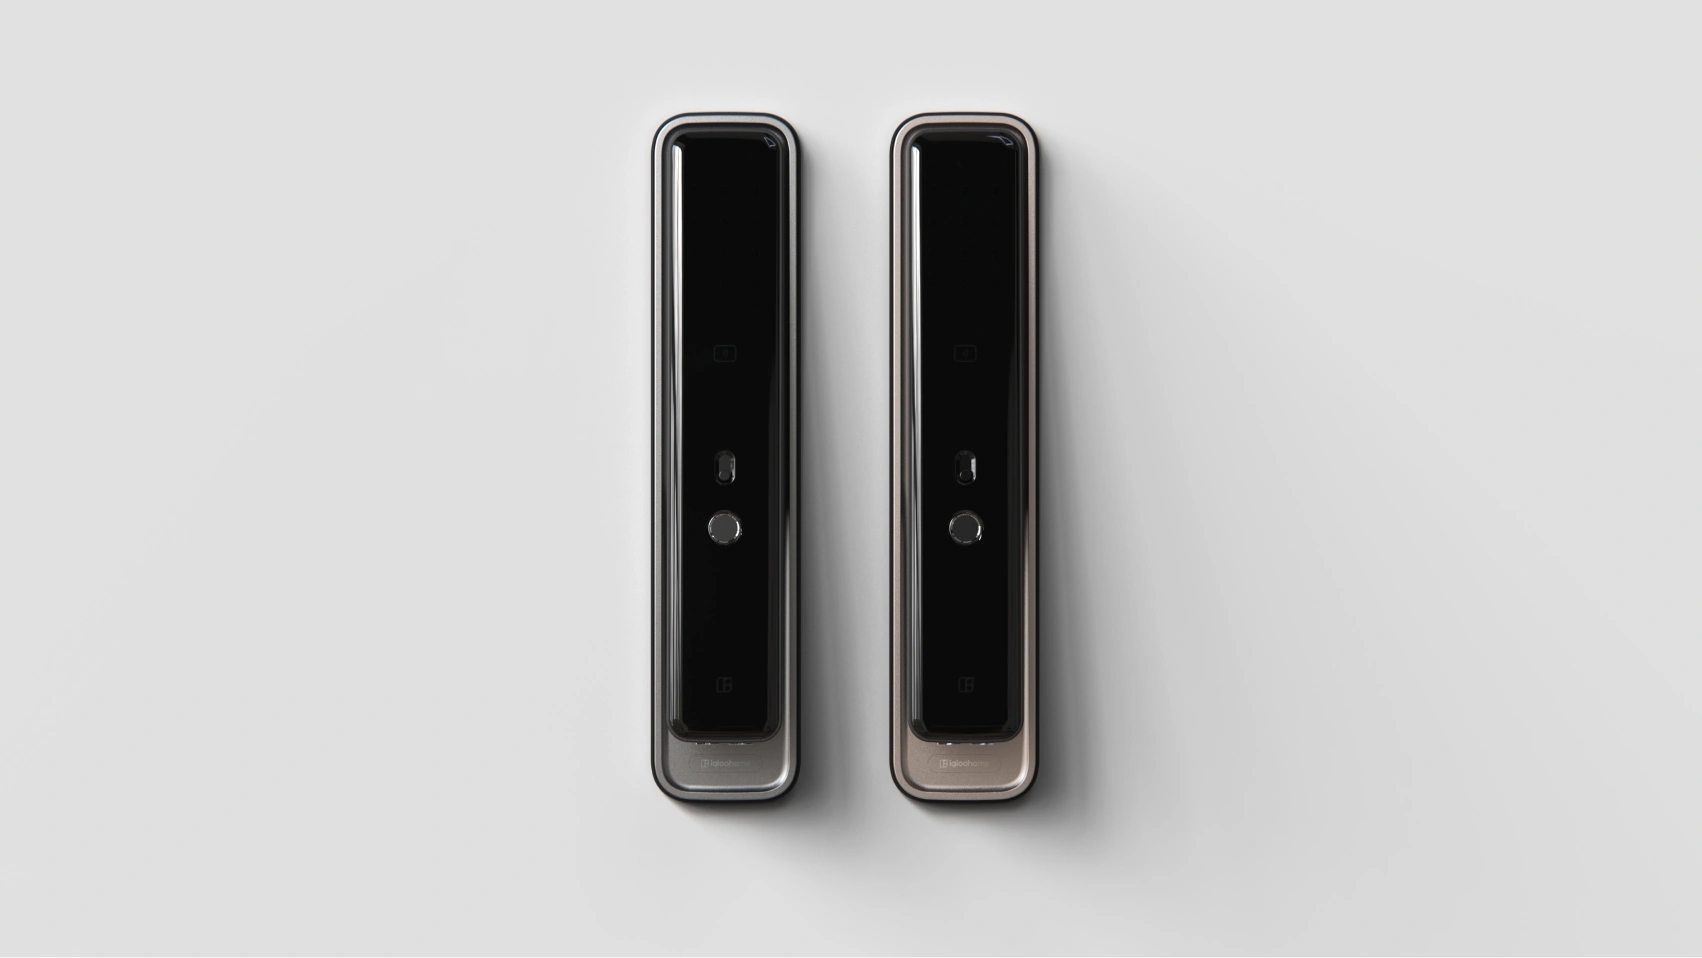 igloohome Mortise Touch smart lock colors